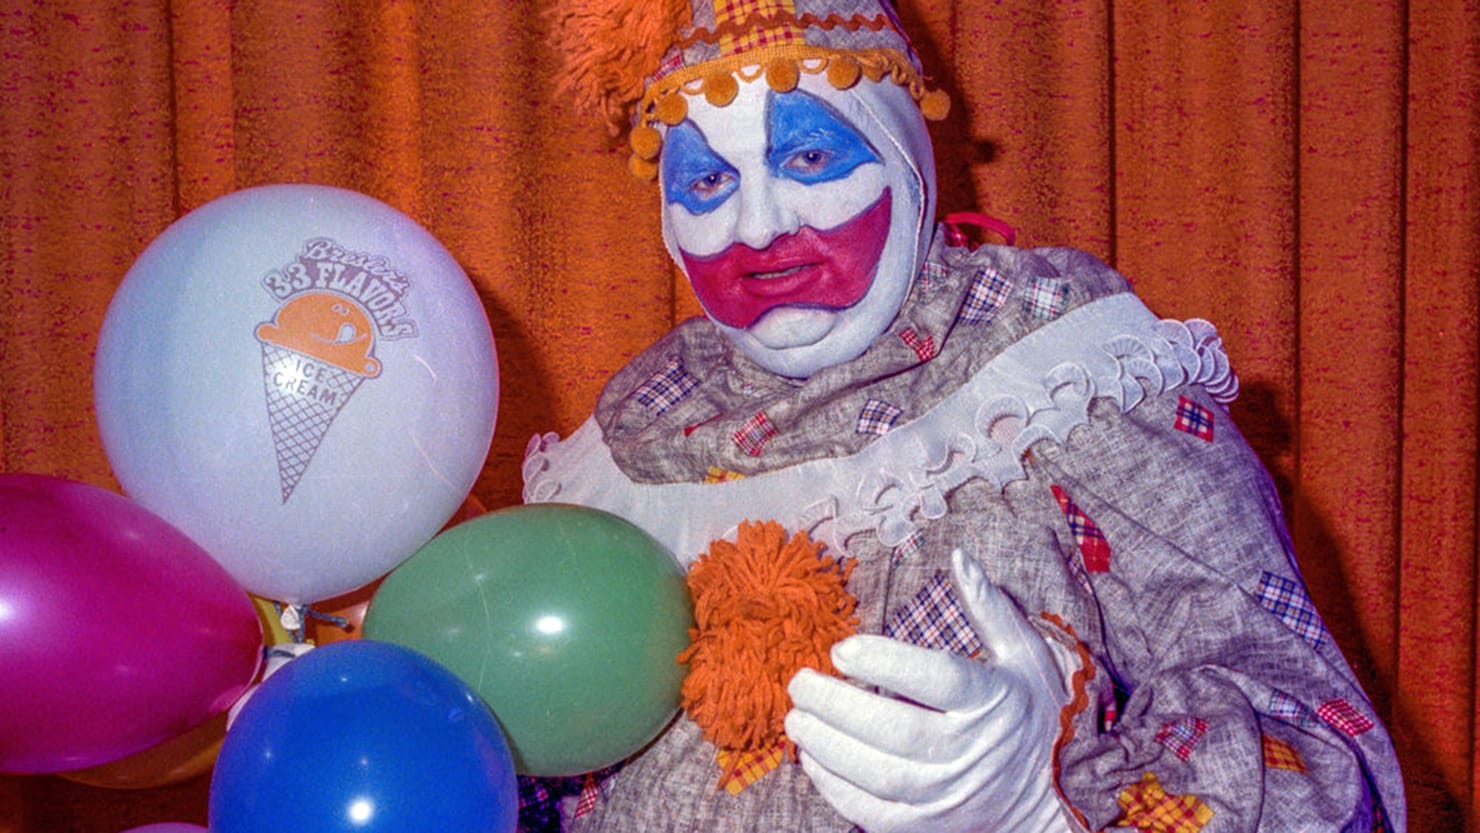 The “killer clown” in real life who terrorized America